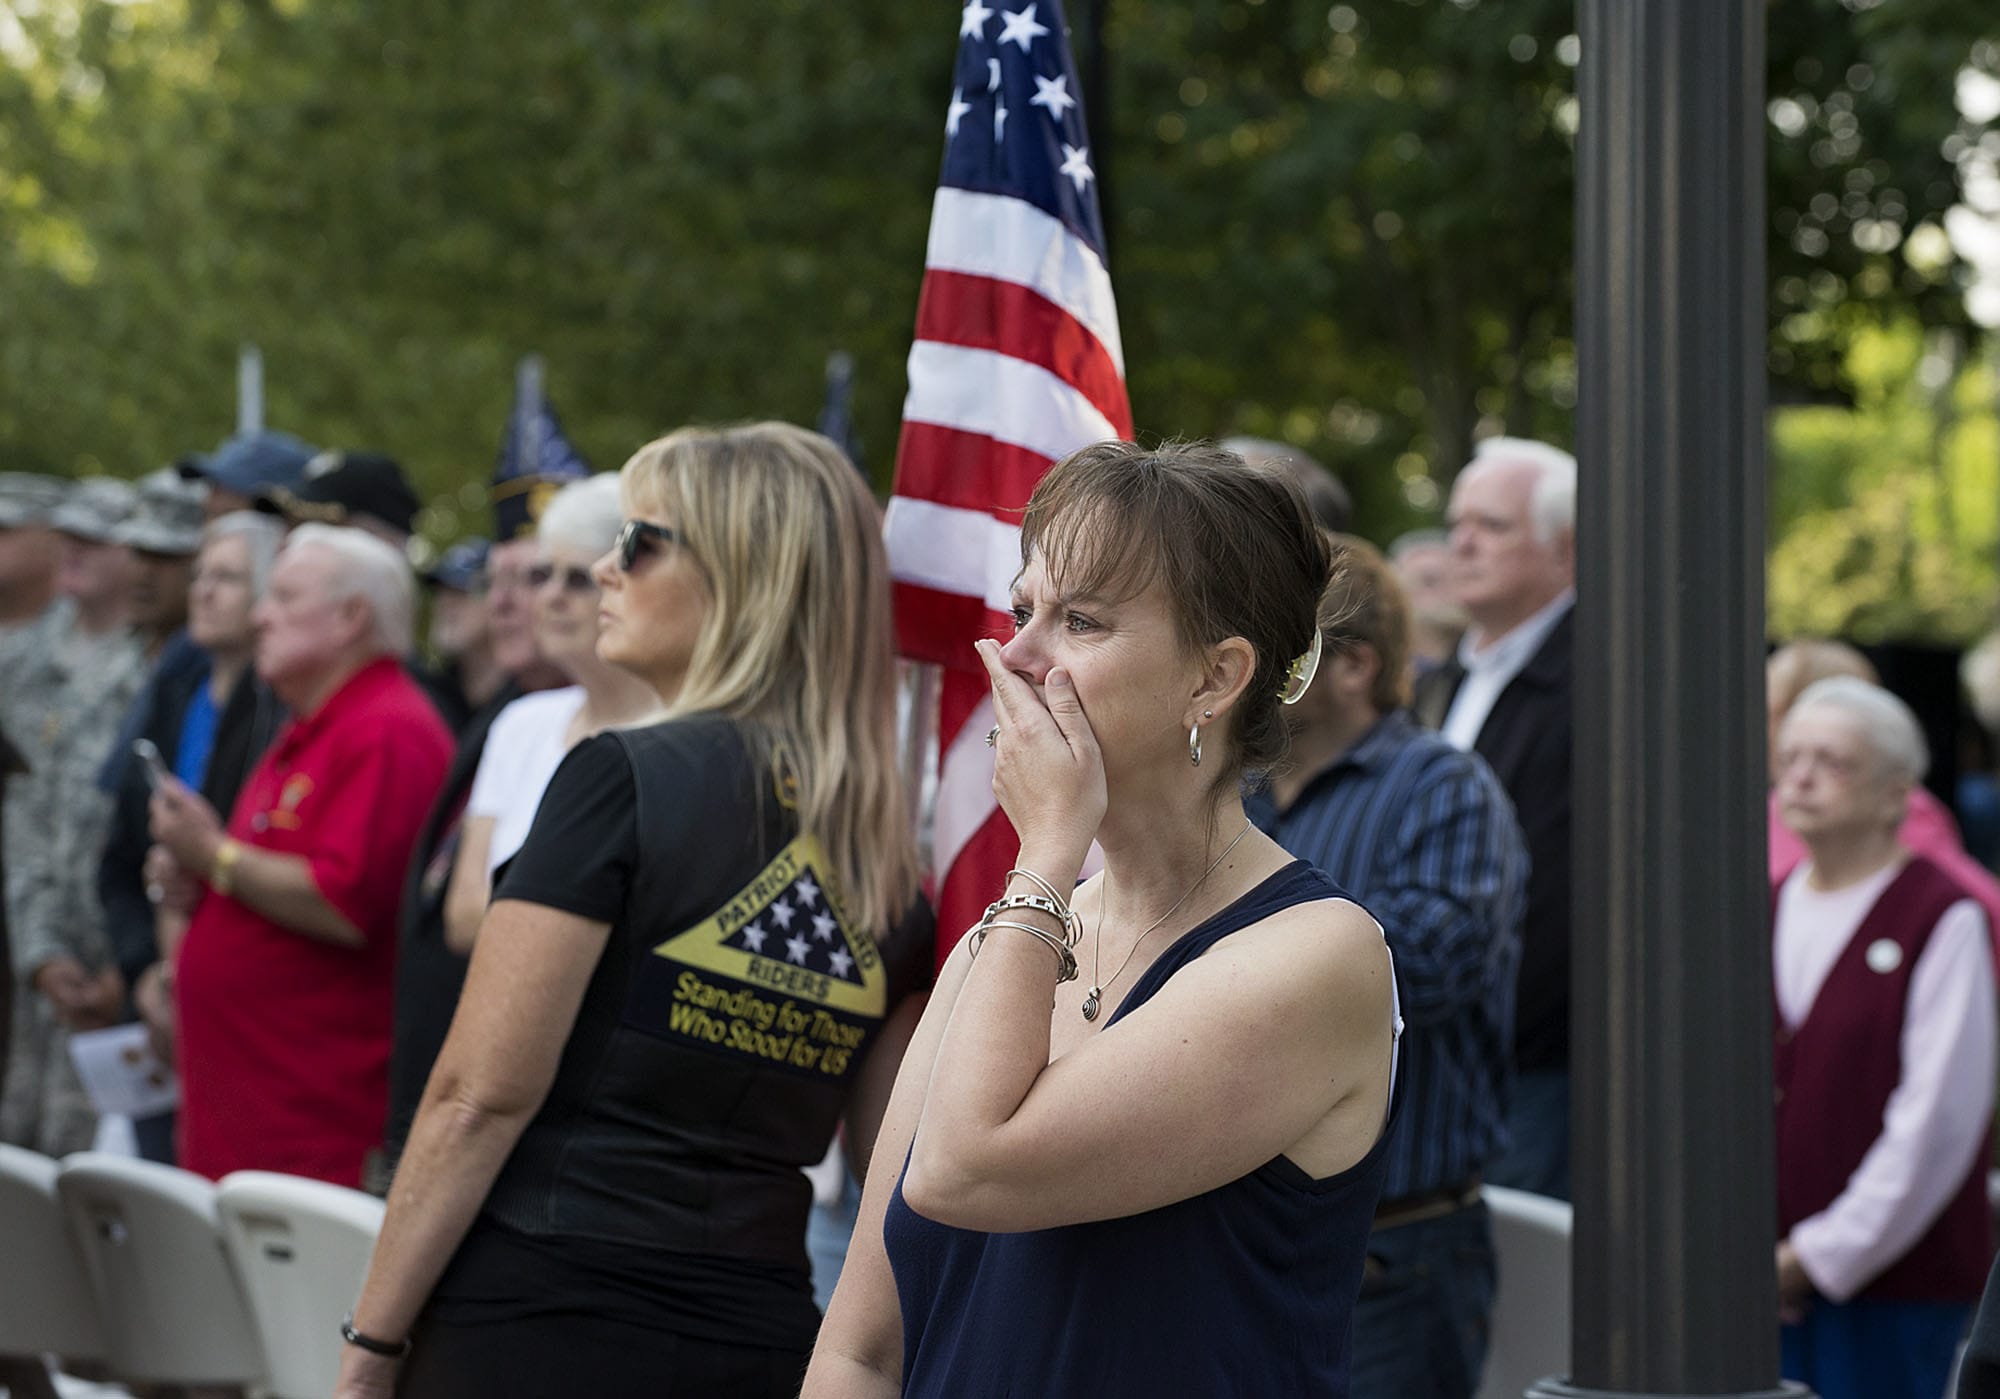 Christine Smith of Vancouver, center, and Mary Astrid of the Patriot Guard Riders, with flag, watch as doves are released in honor of the victims of Sept. 11, 2001 during a remembrance ceremony on Friday morning, Sept. 11, 2015 at Vancouver City Hall.